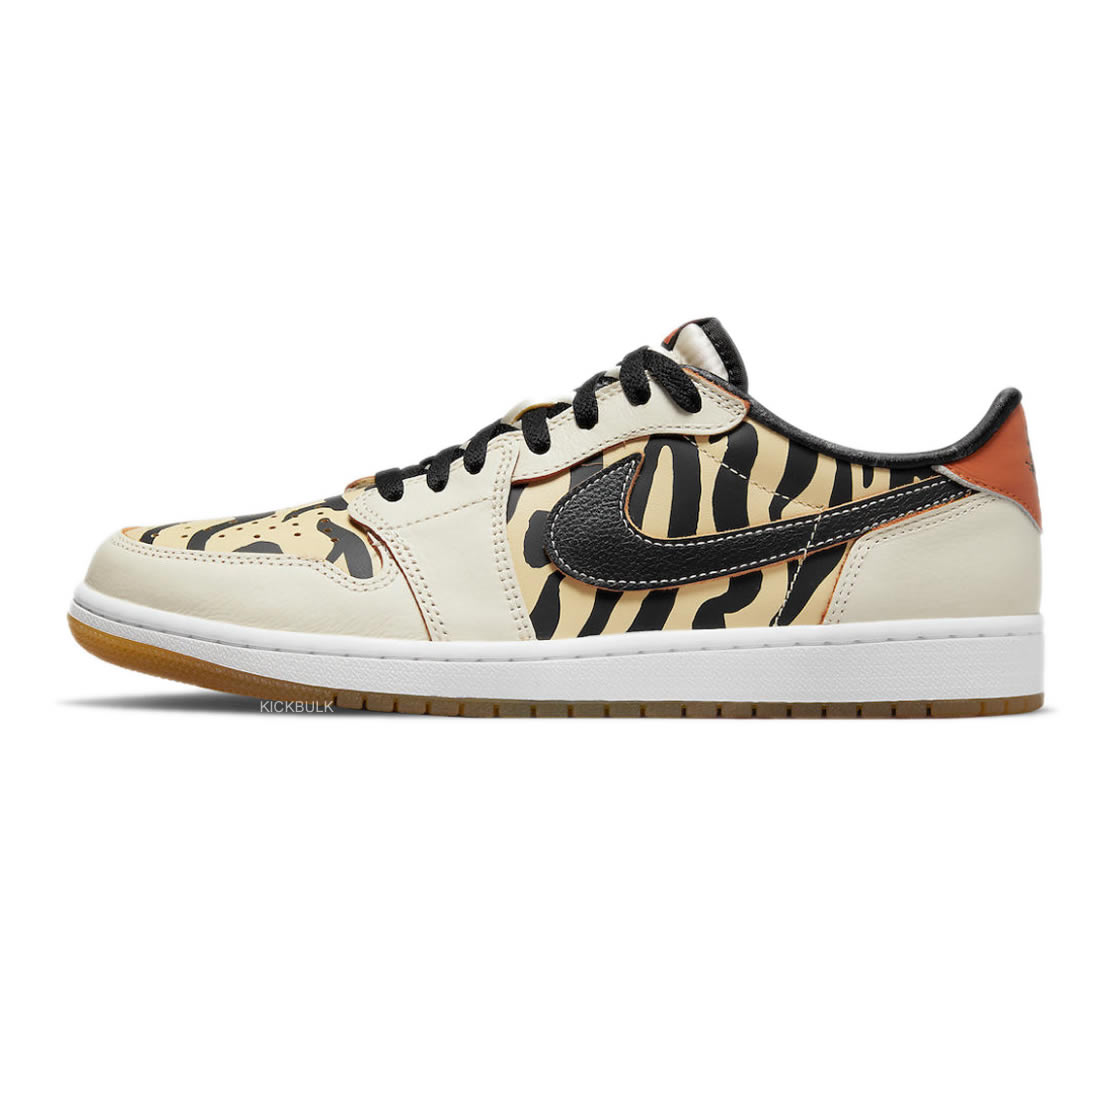 Air Jordan 1 Low Og Chinese New Years Year Of The Tiger Dh6932 100 1 - www.kickbulk.co